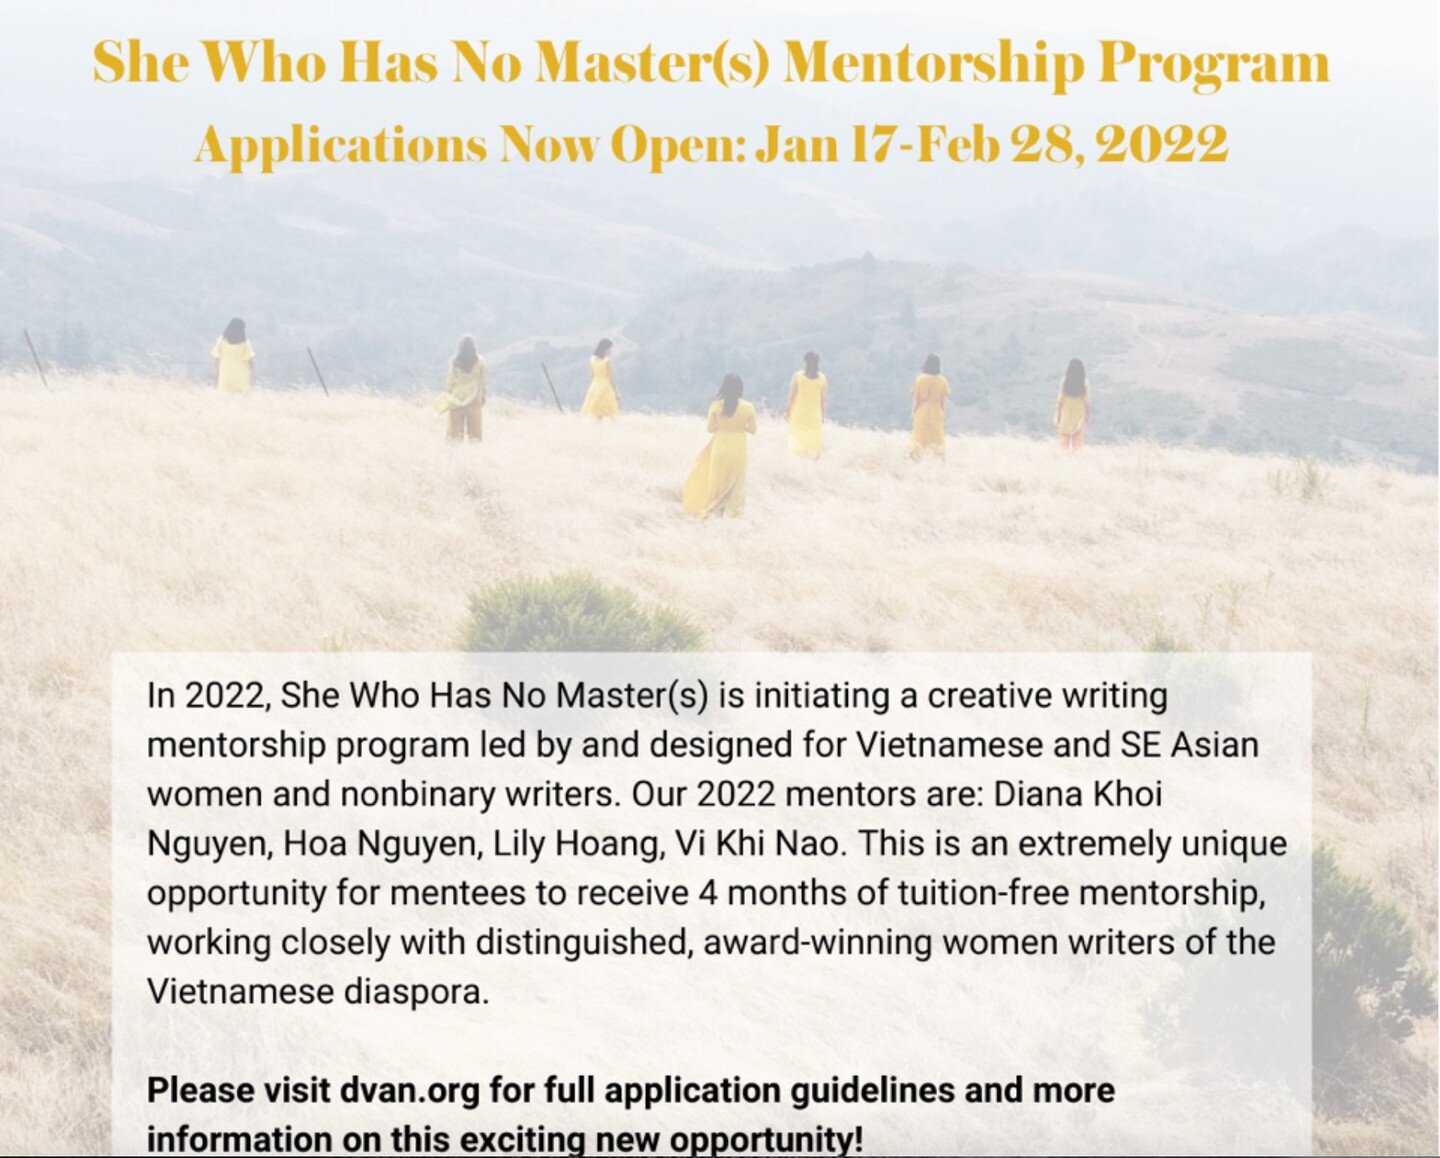 Applications are now open for a FREE mentorship program for Vietnamese and SE Asian women and nonbinary writers. Deadline is 2/28/22!
https://dvan.org/2022/01/2022-swhnm-mentorship-program-call-for-applications/